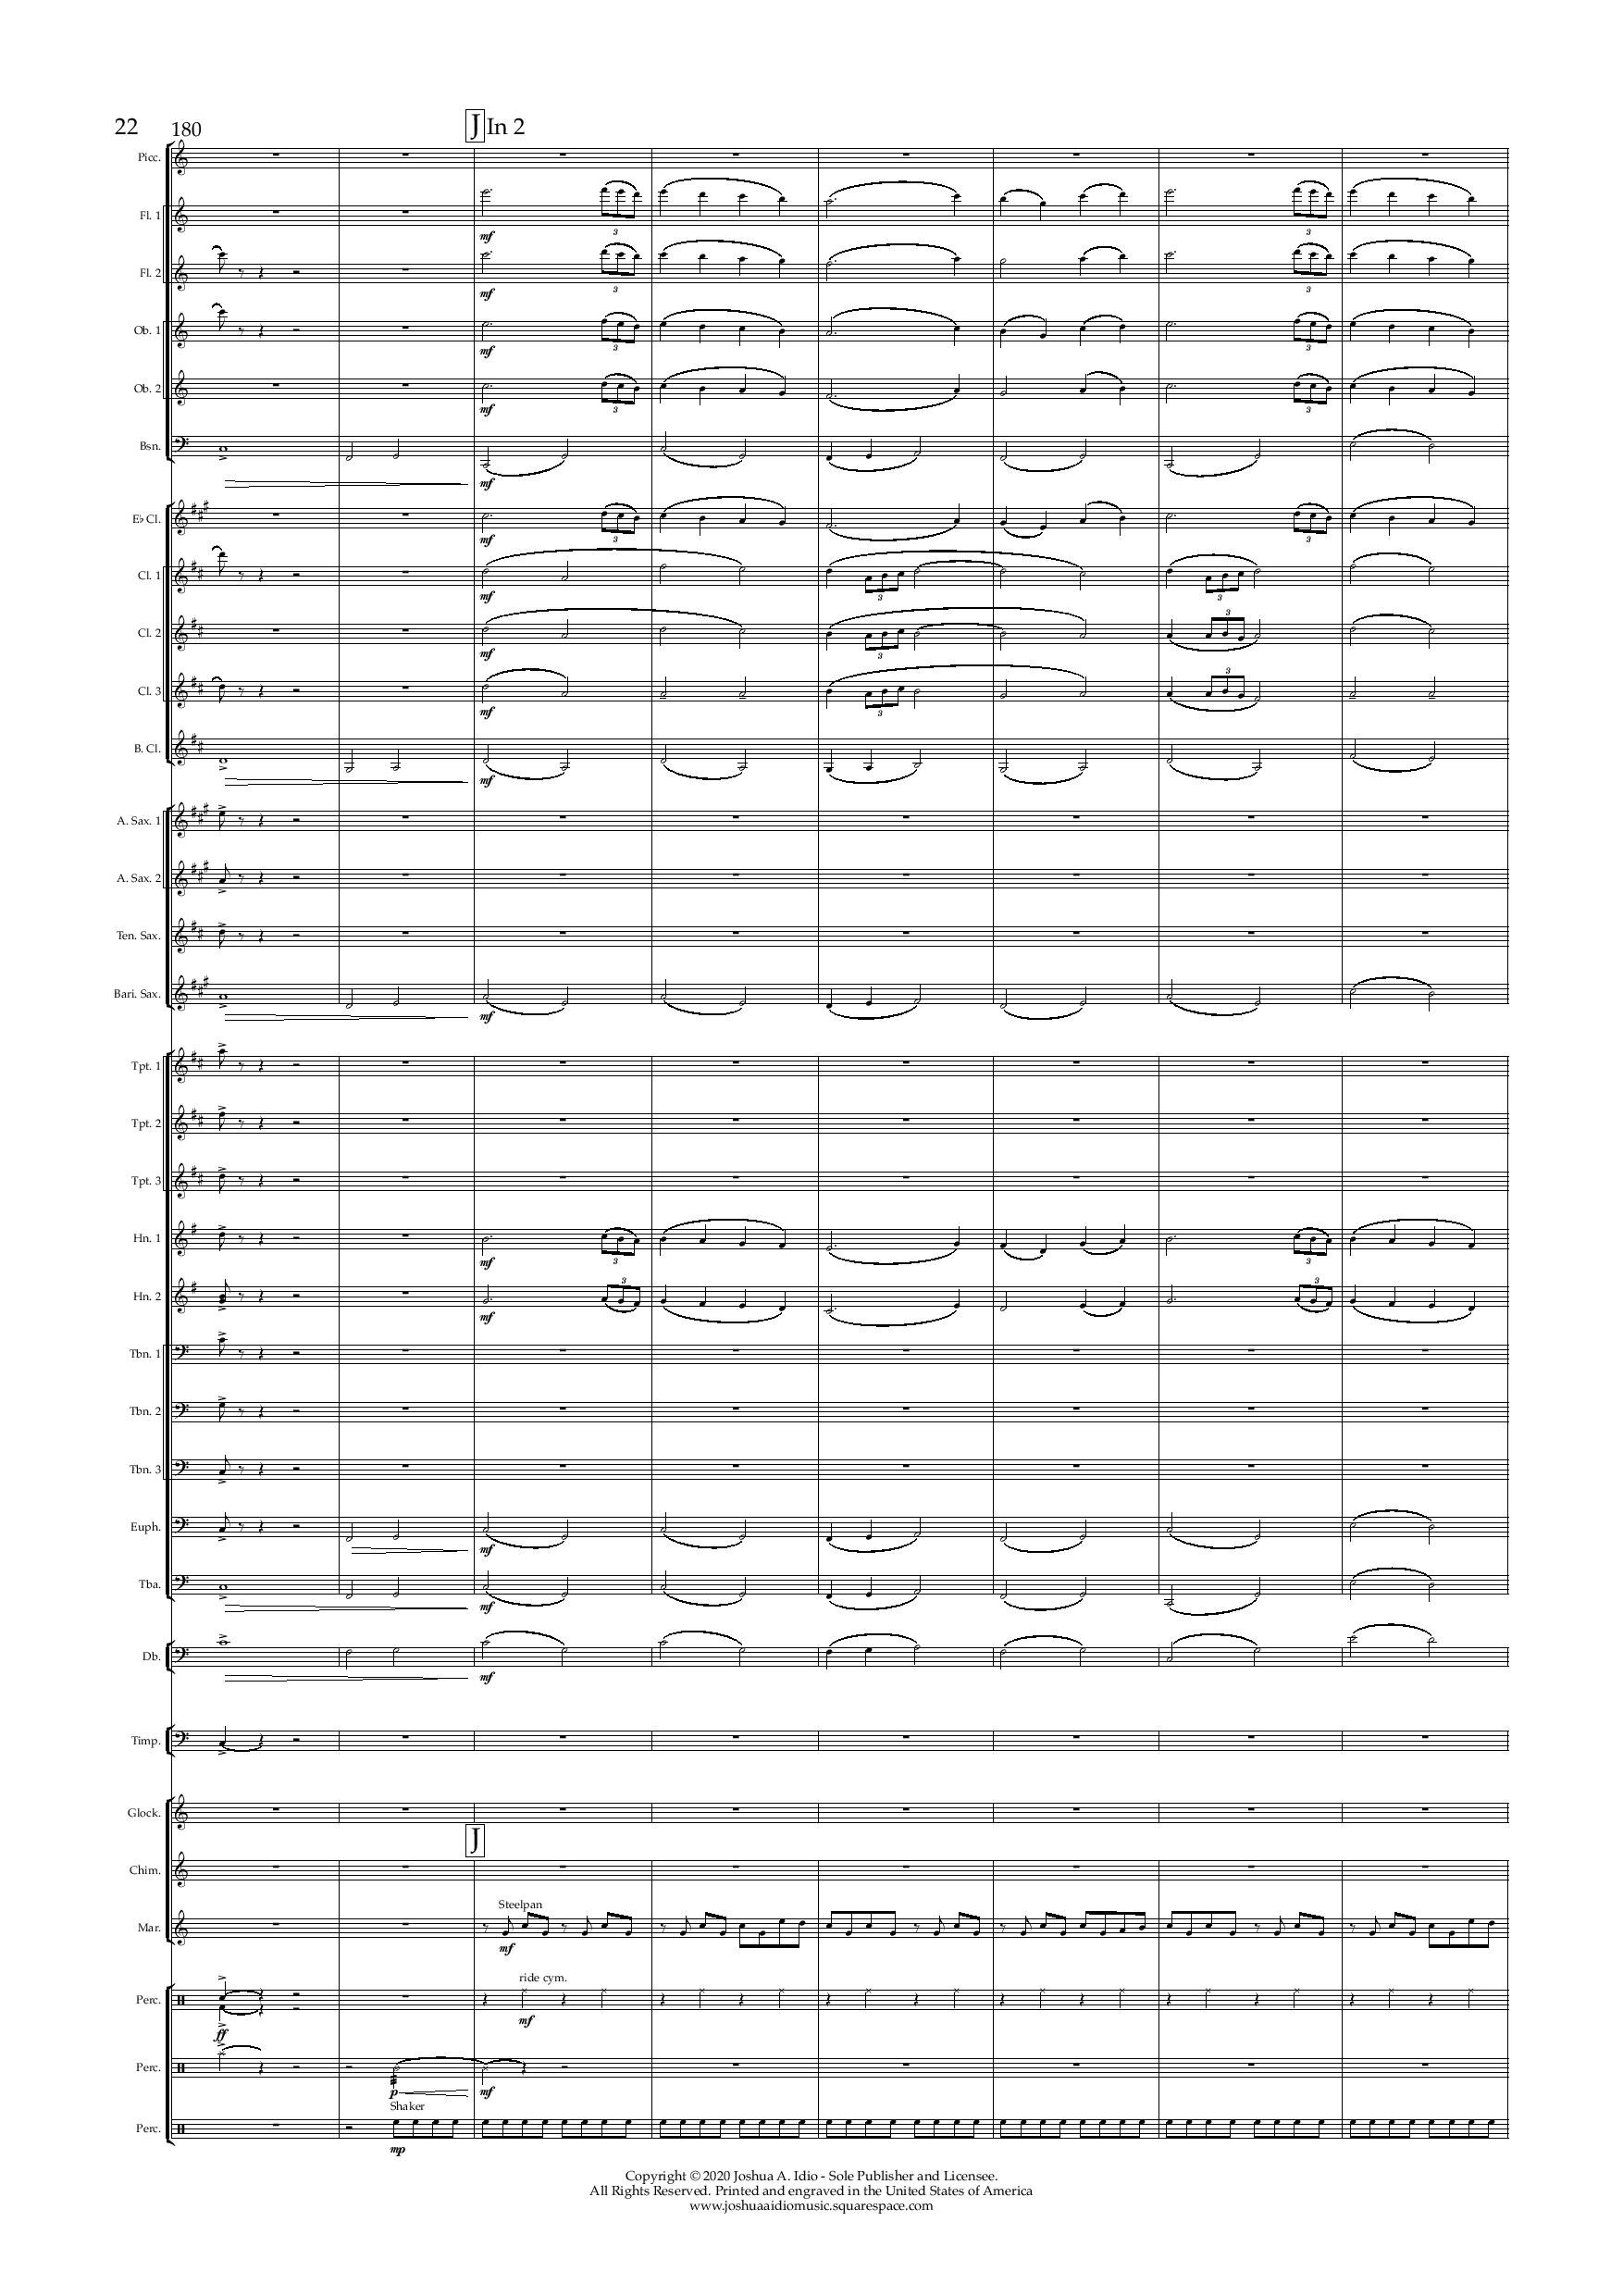 The Cruise Line Dream - Conductor s Score-page-022.jpg